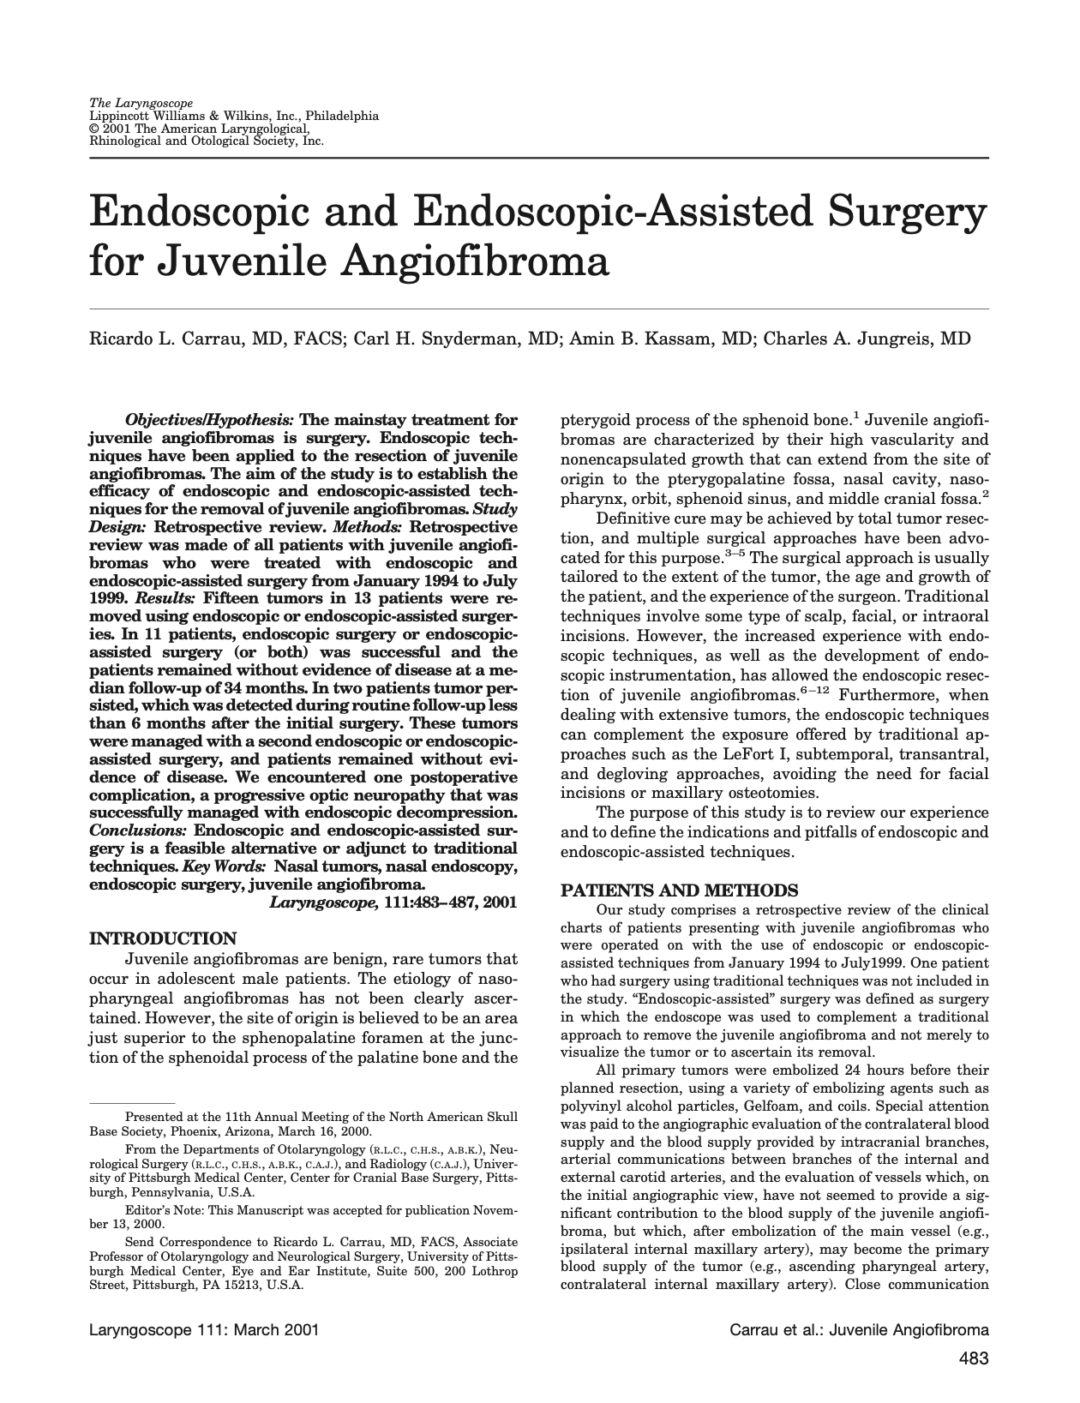 Endoscopic and Endoscopic-Assisted Surgery for Juvenile Angiofibroma